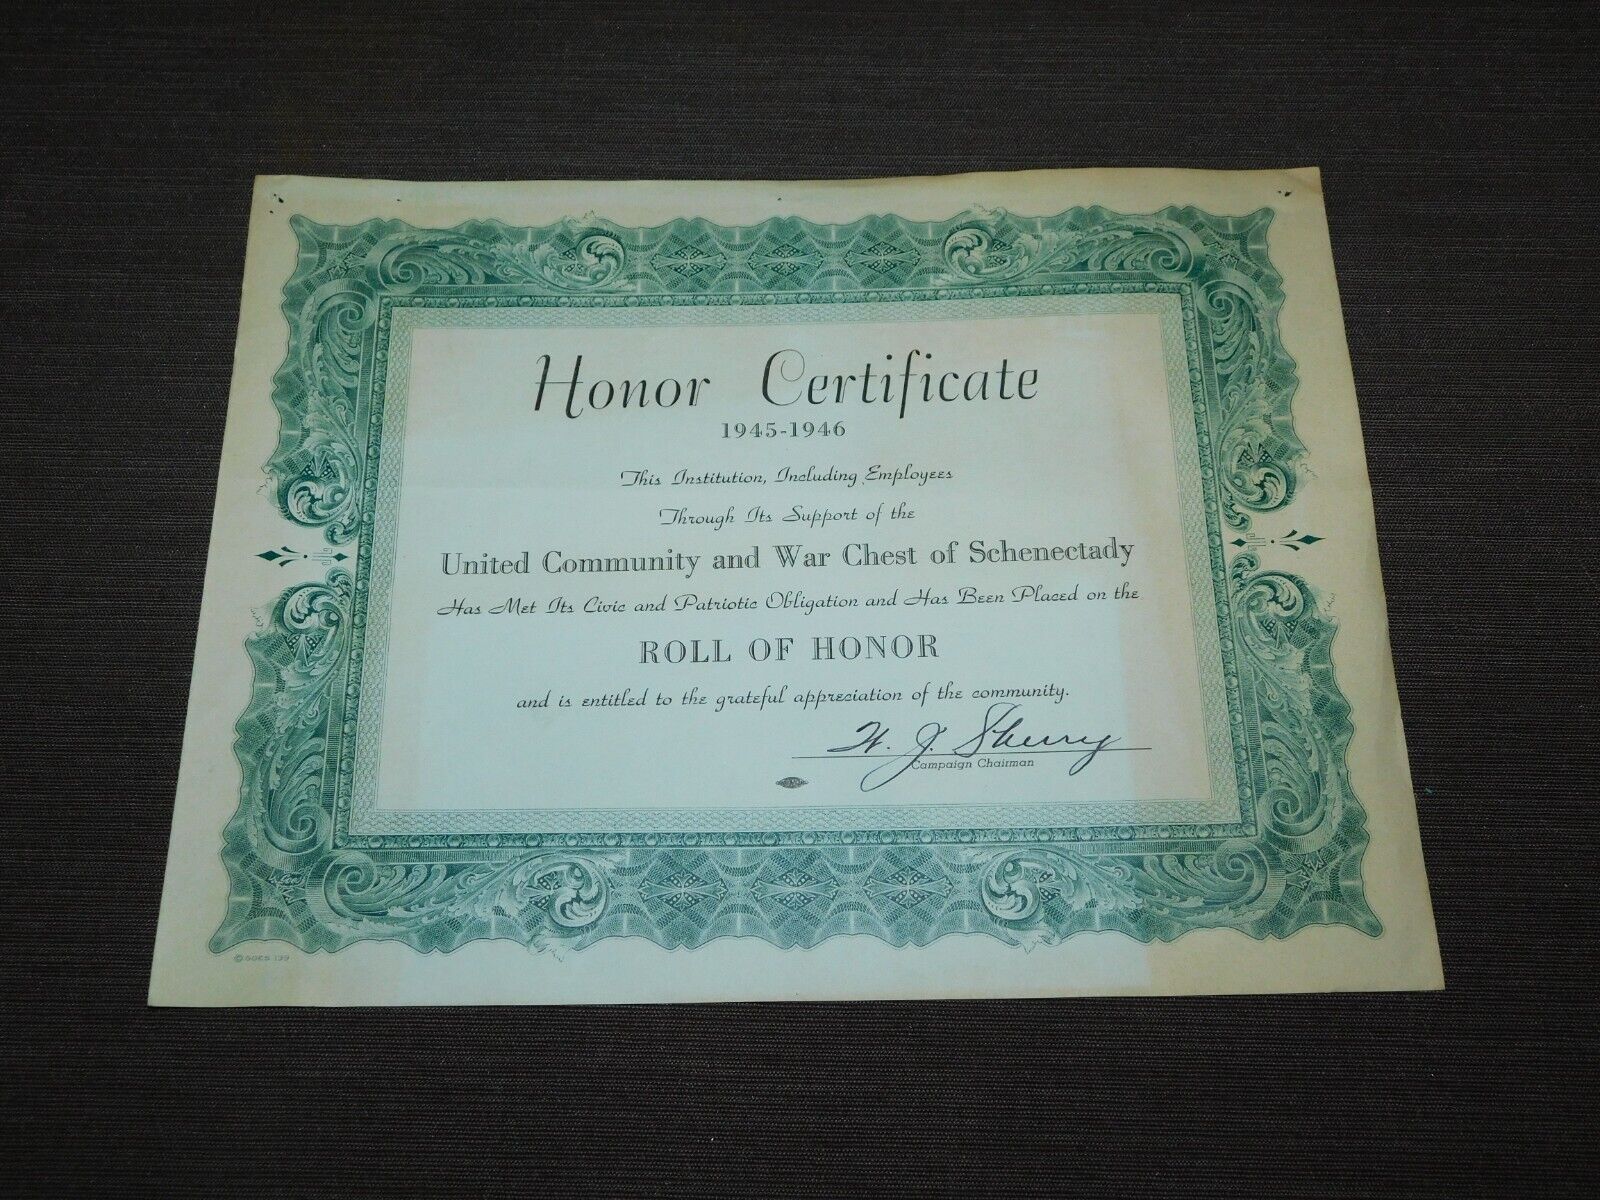 VINTAGE 1945-1946 HONOR CERTIFICATE UNITED COMMUNITY WAR CHEST OF SCHENECTADY